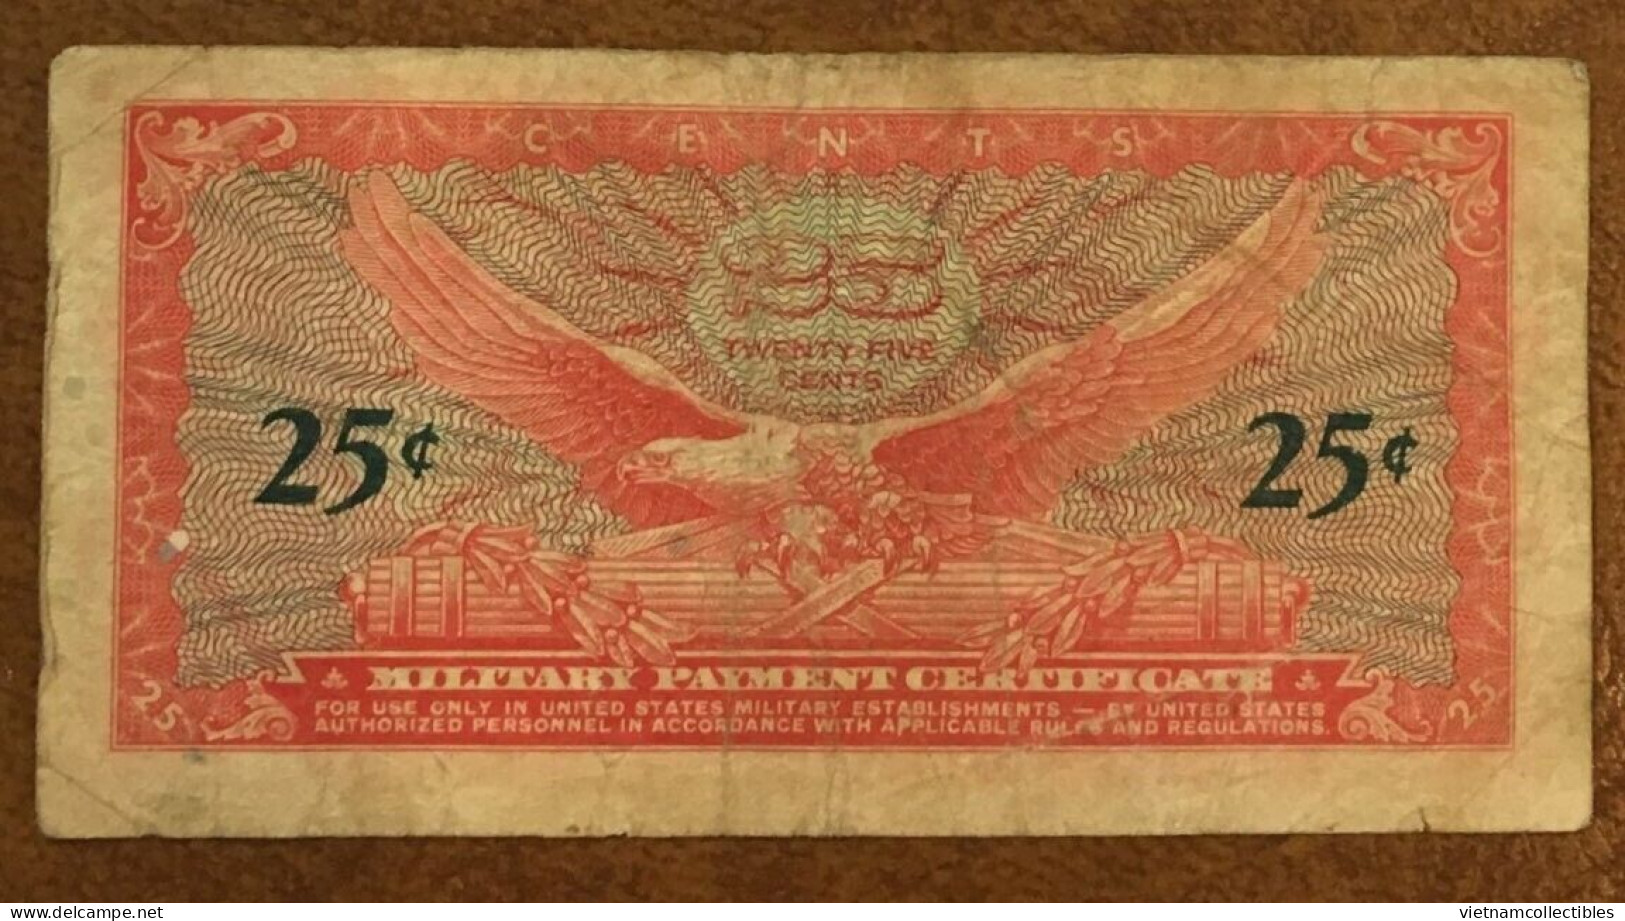 USA MPC 25 Cents Military Payment Series 641 VF Banknote Note 1964 Using In Vietnam Viet Nam - Plate # 8 / 2 Photos - 1965-1968 - Reeksen 641